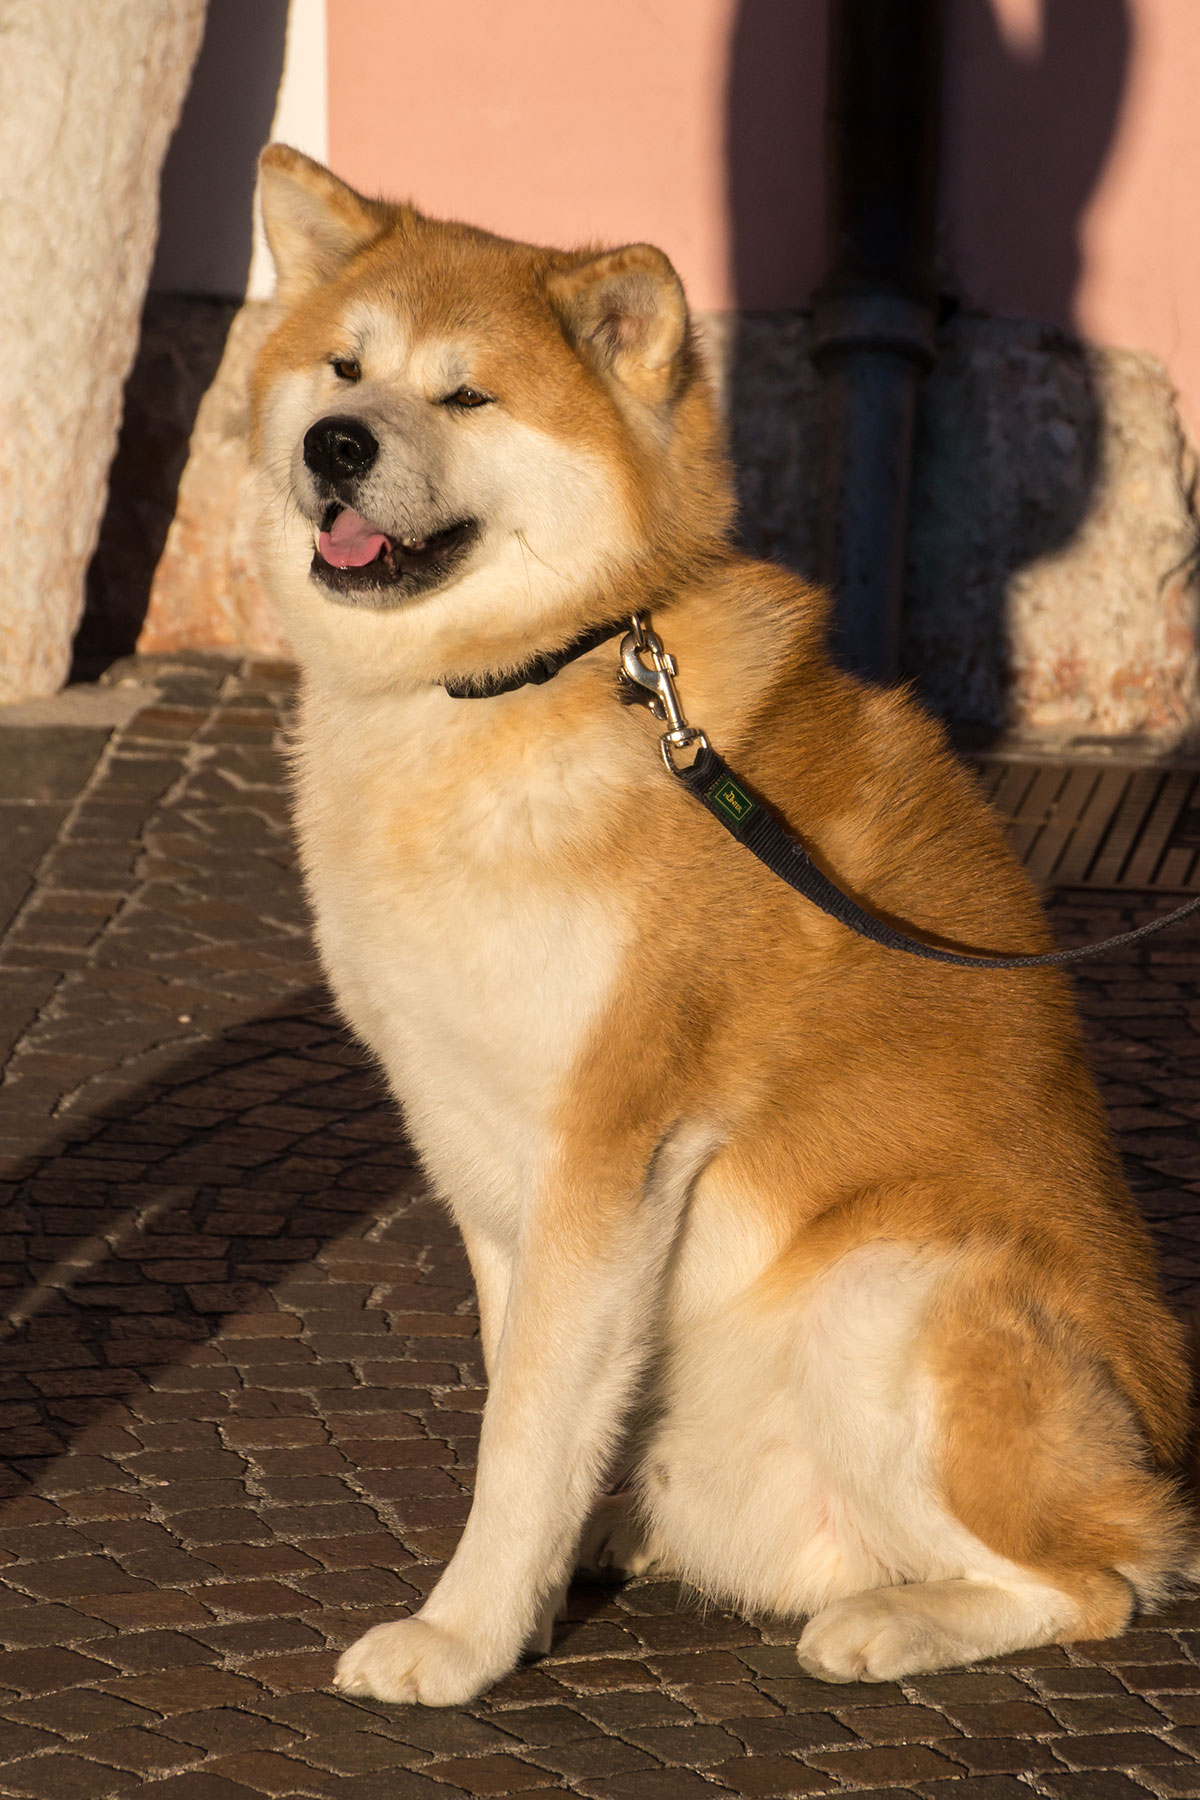 Akita, an old Japanese dog breed, known from the movie 